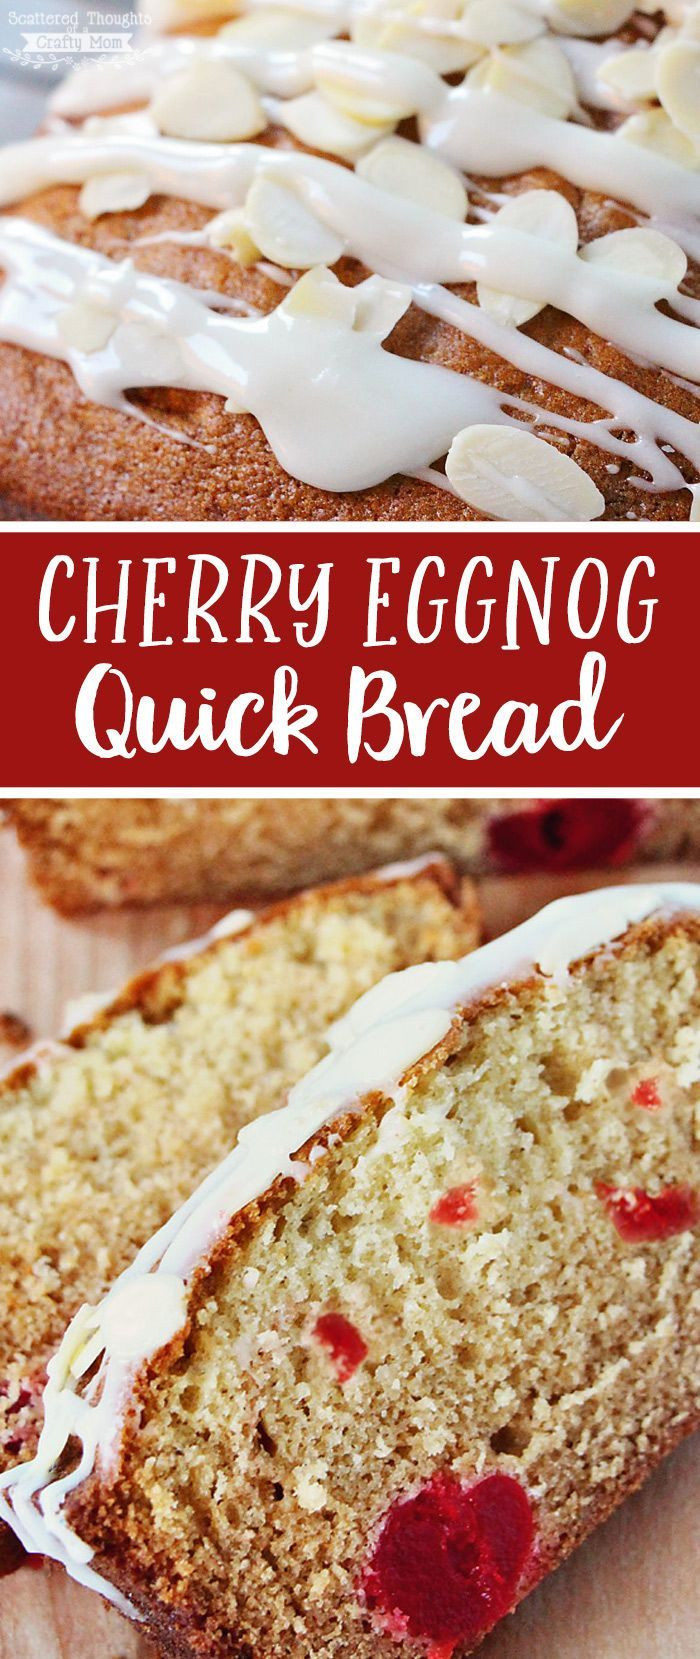 Christmas Quick Bread Recipe
 17 Best images about Christmas Desserts on Pinterest